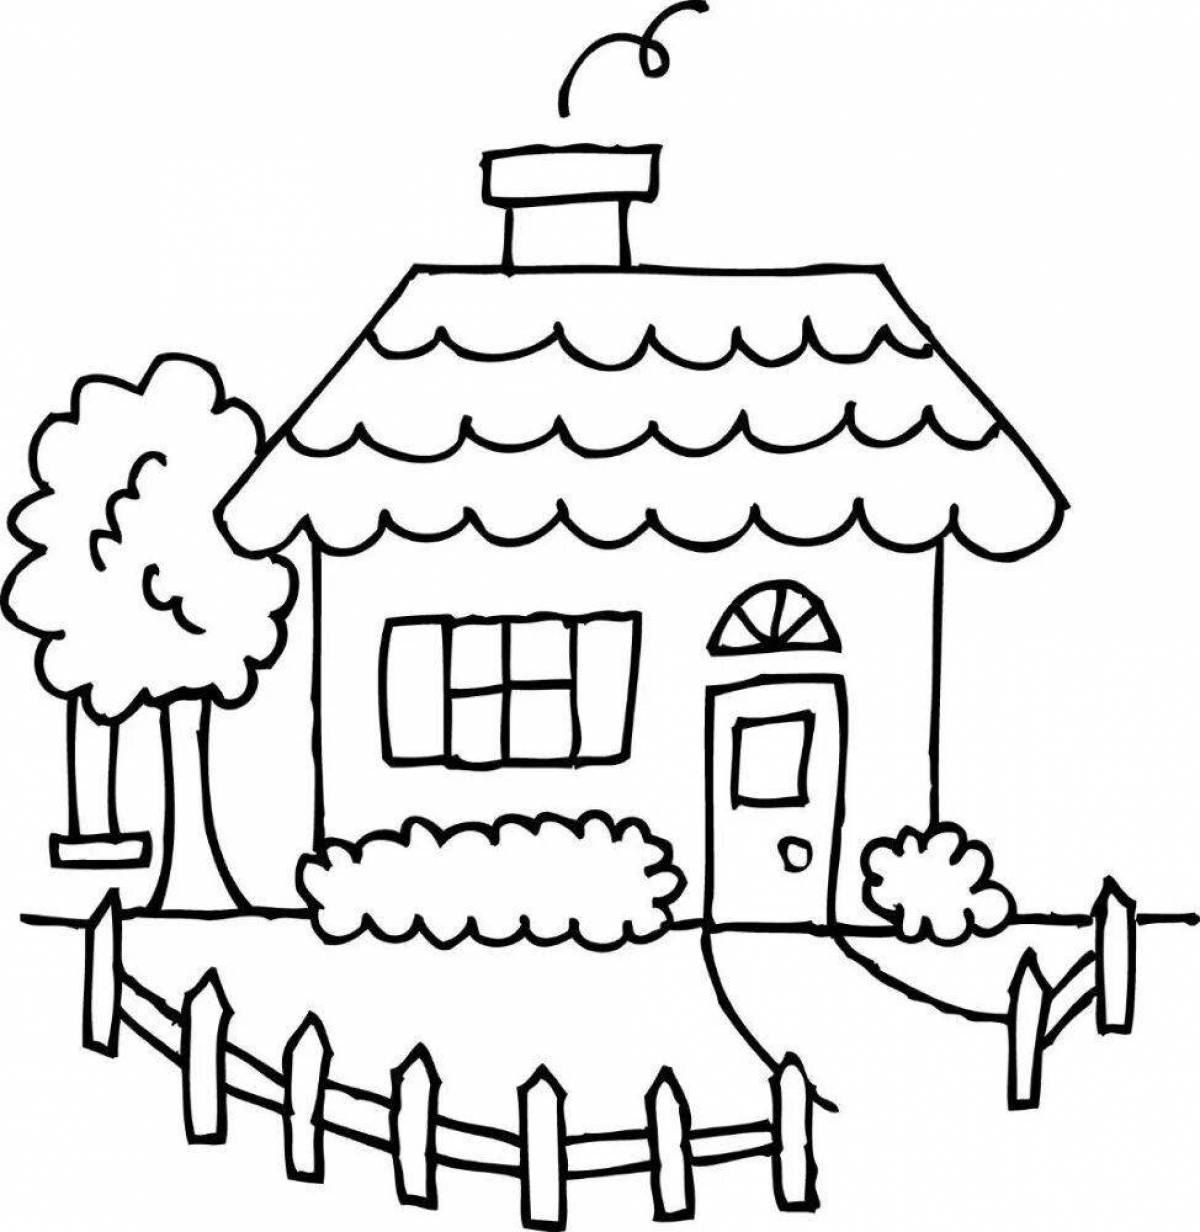 Coloring page charming simple house